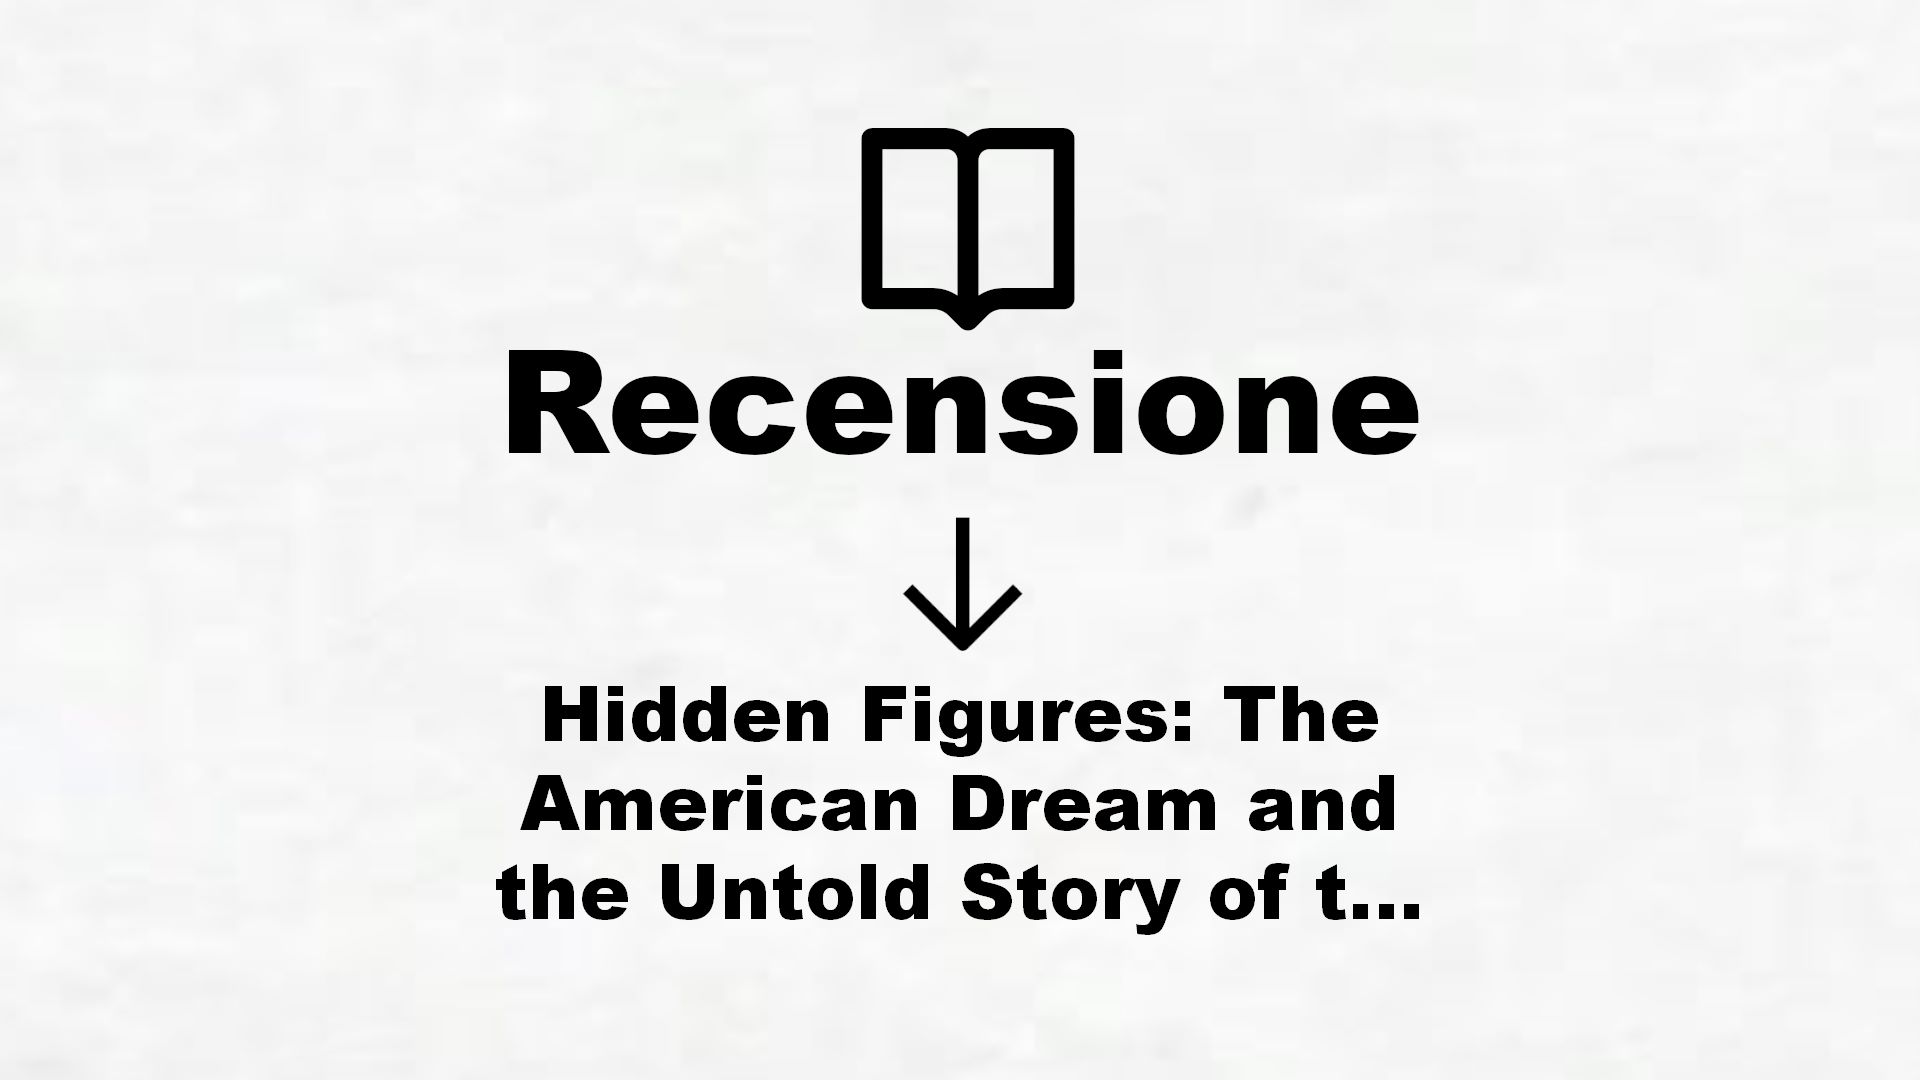 Hidden Figures: The American Dream and the Untold Story of the Black Women Mathematicians Who Helped Win the Space Race (English Edition) – Recensione Libro